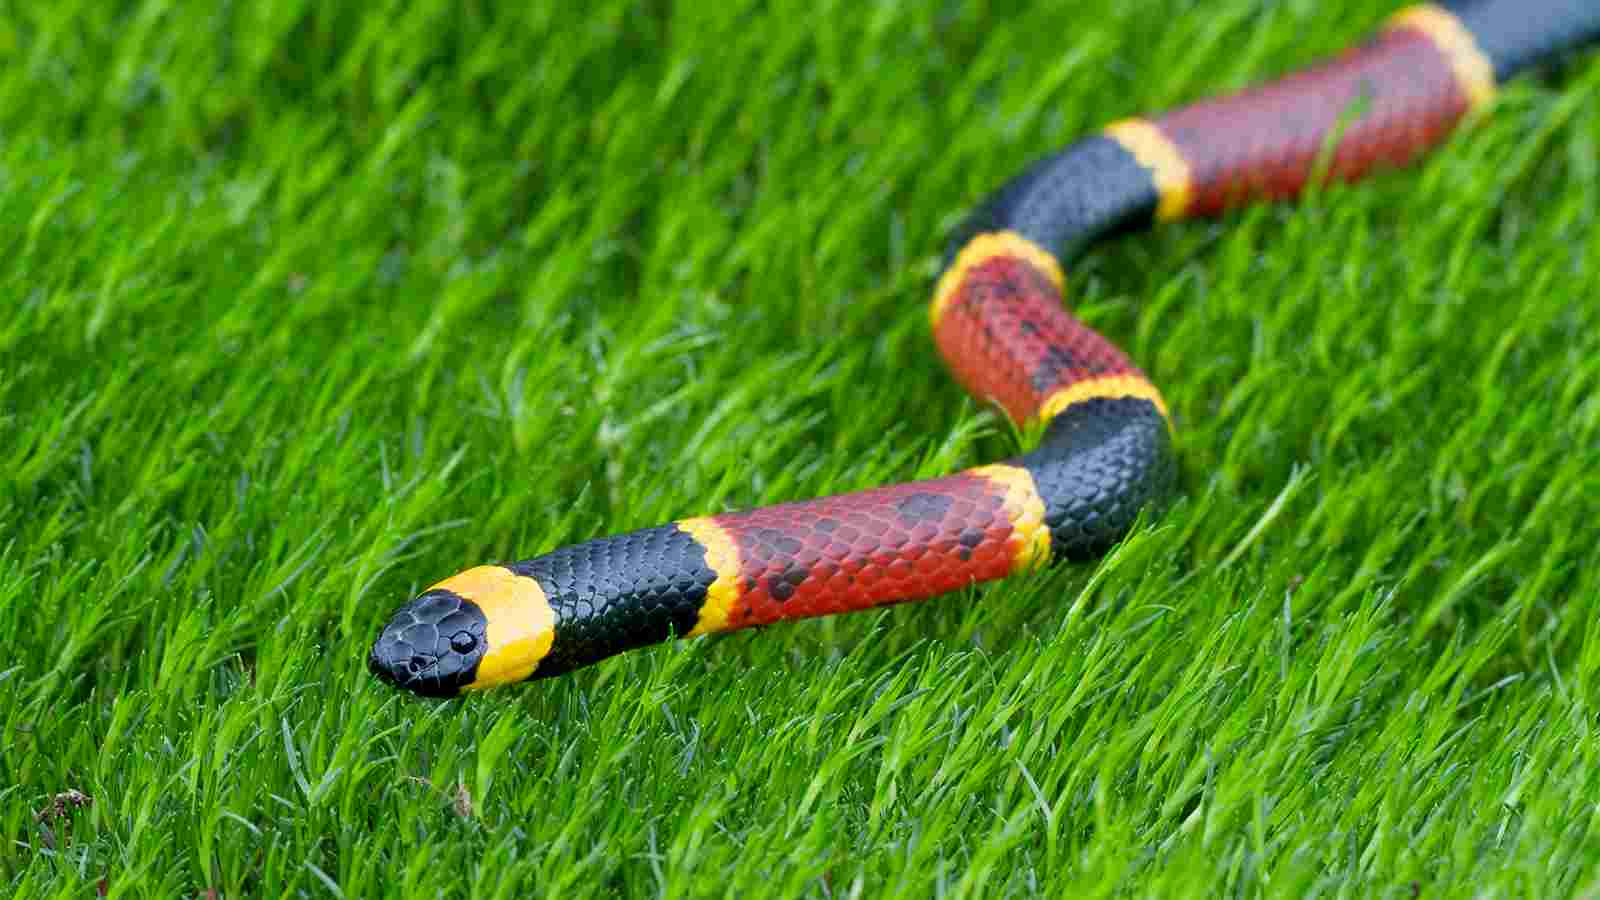 The Lowdown on Coral Snake Encounters